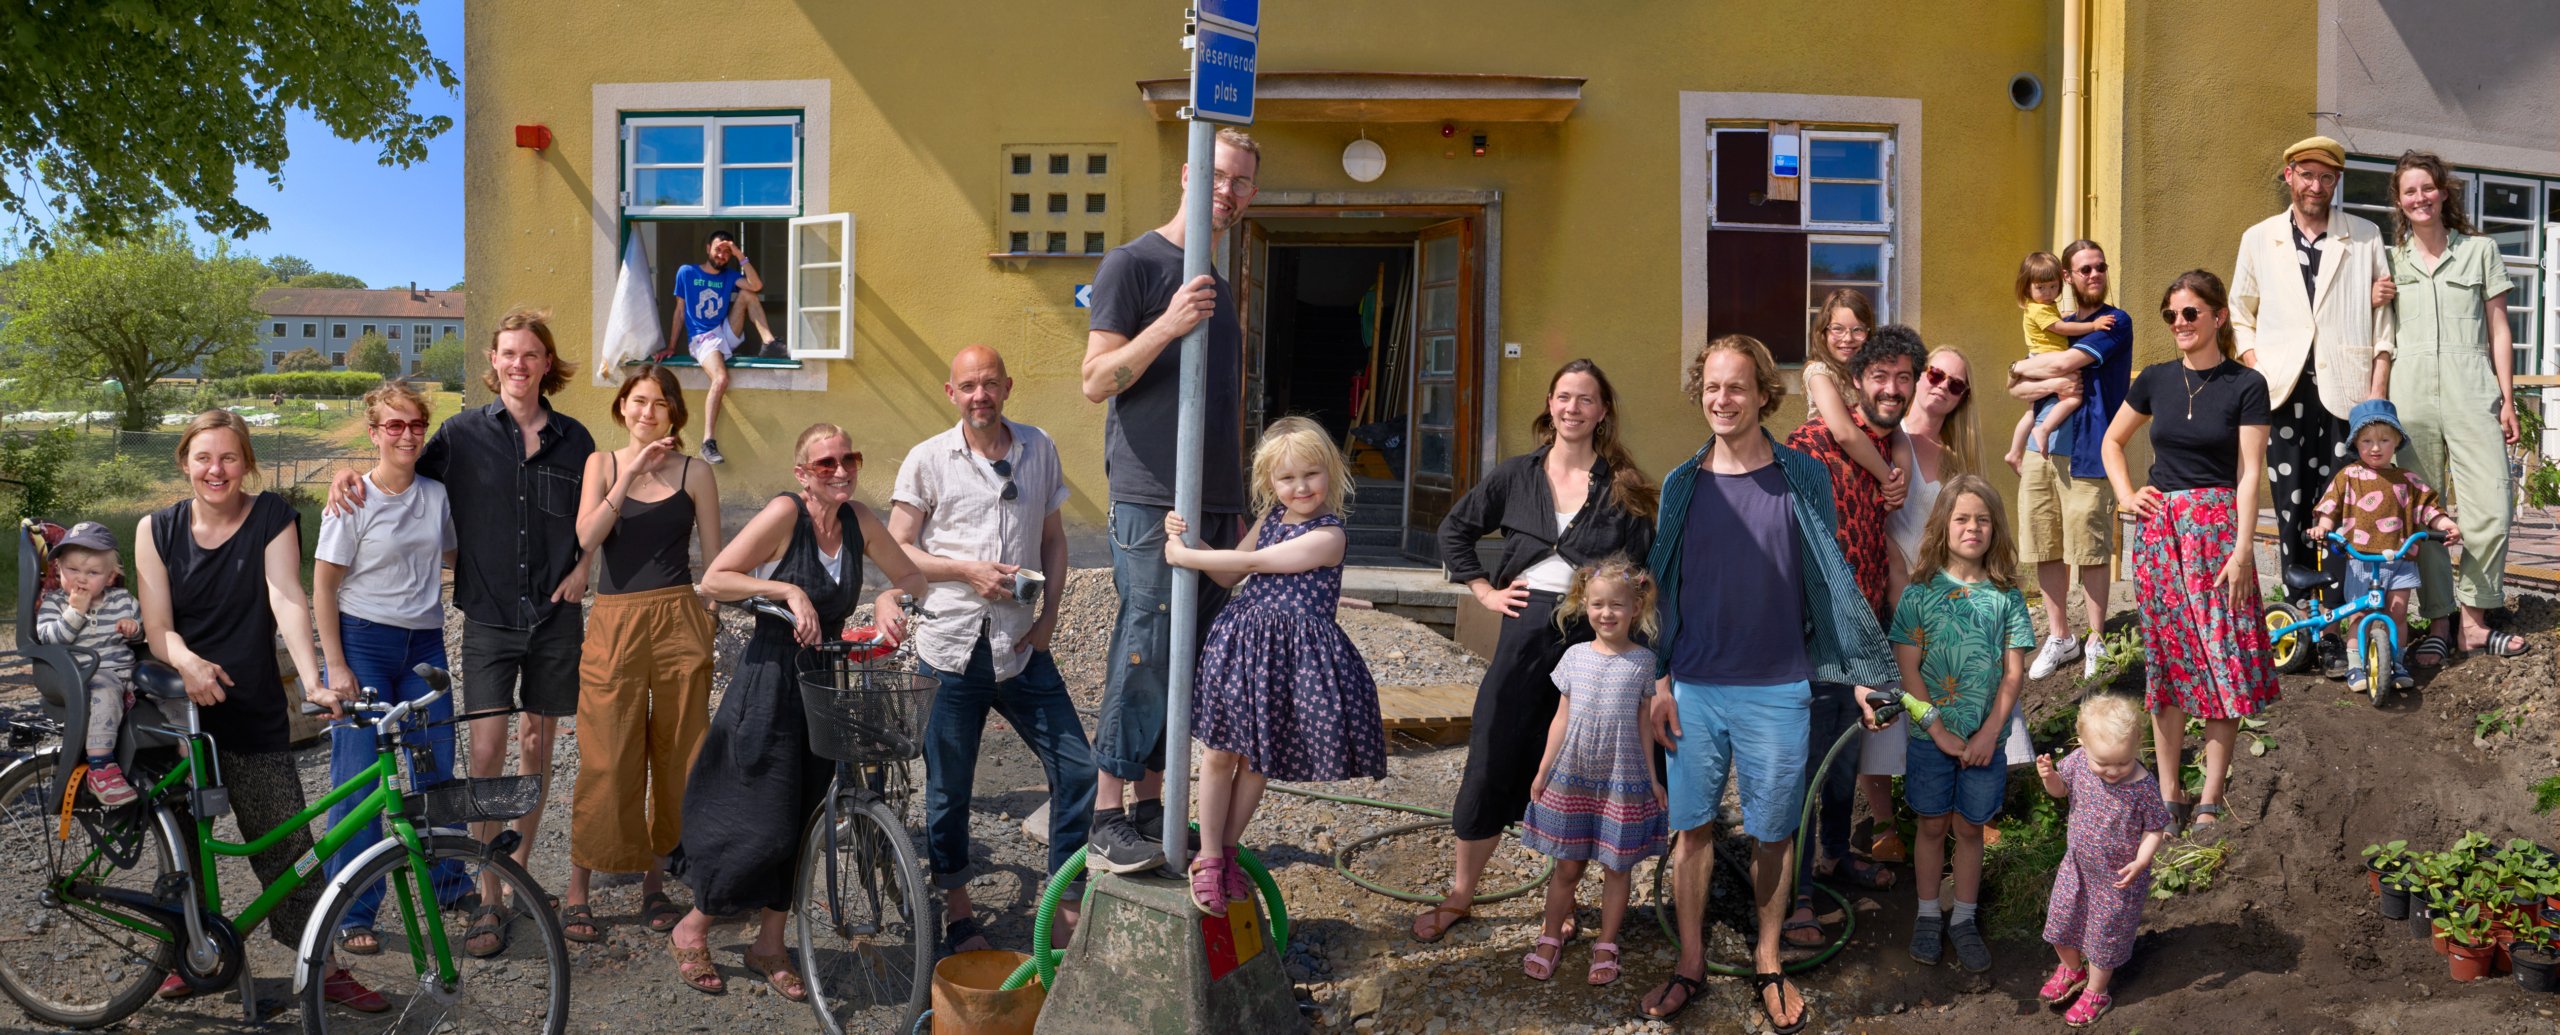 Ludvig and a large group of the people living together standing in front of the house on a sunny summer day.